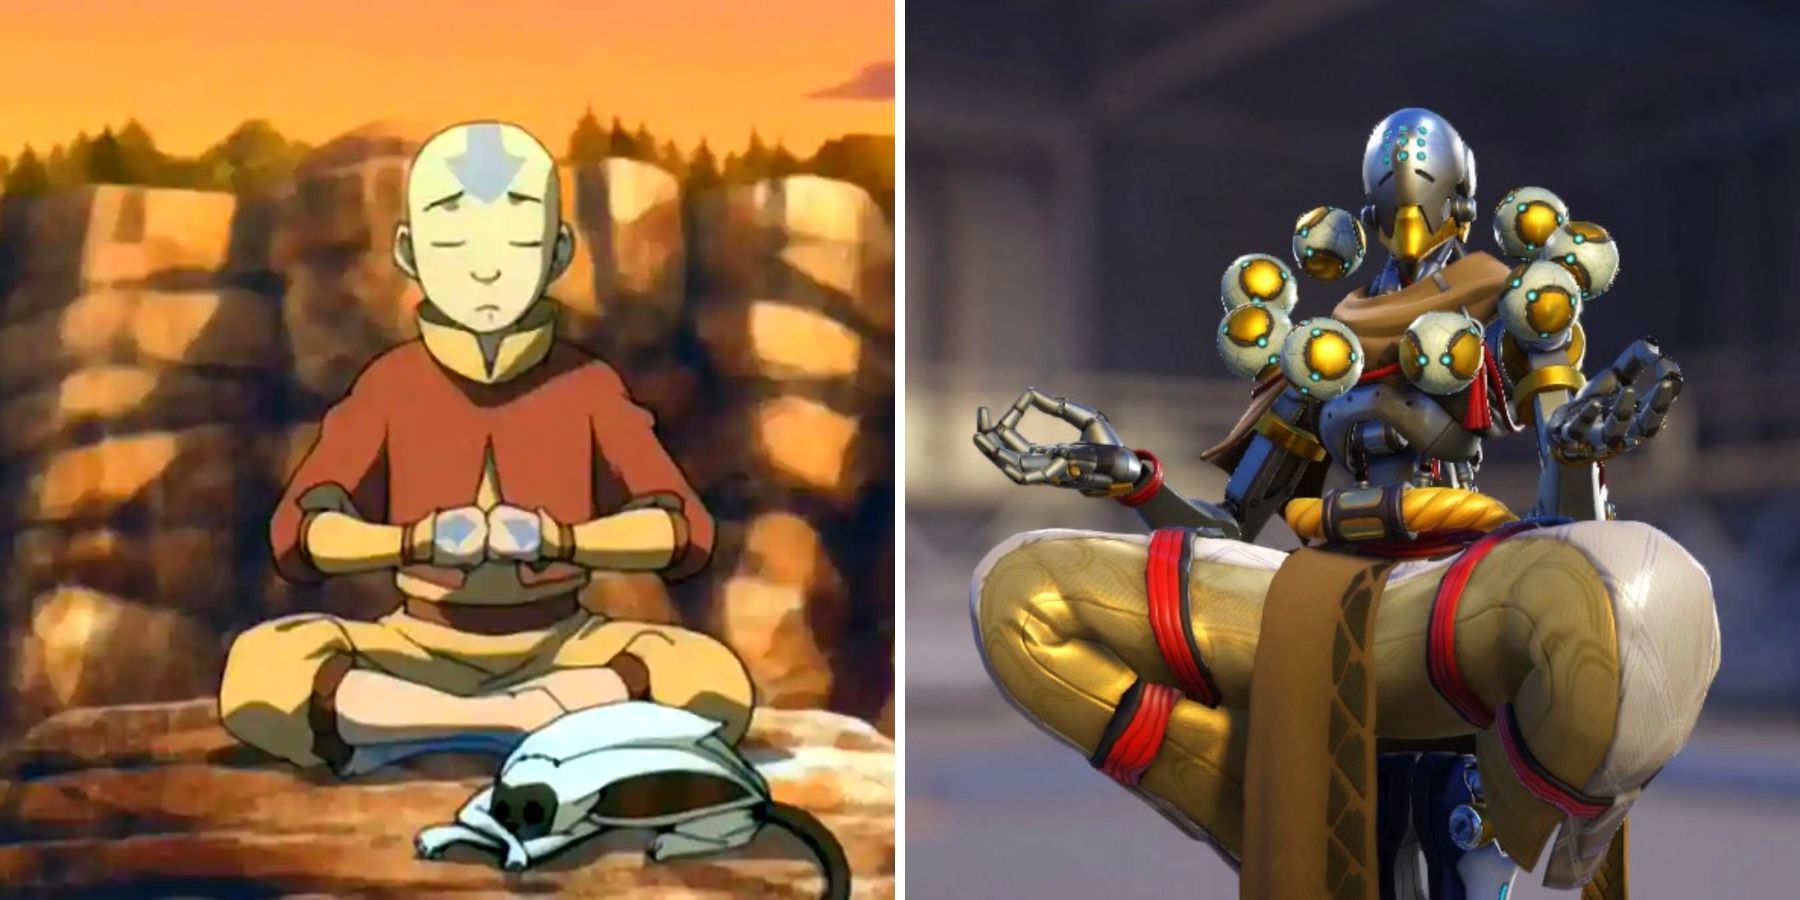 Overwatch 2 and Avatar The Last Airbender